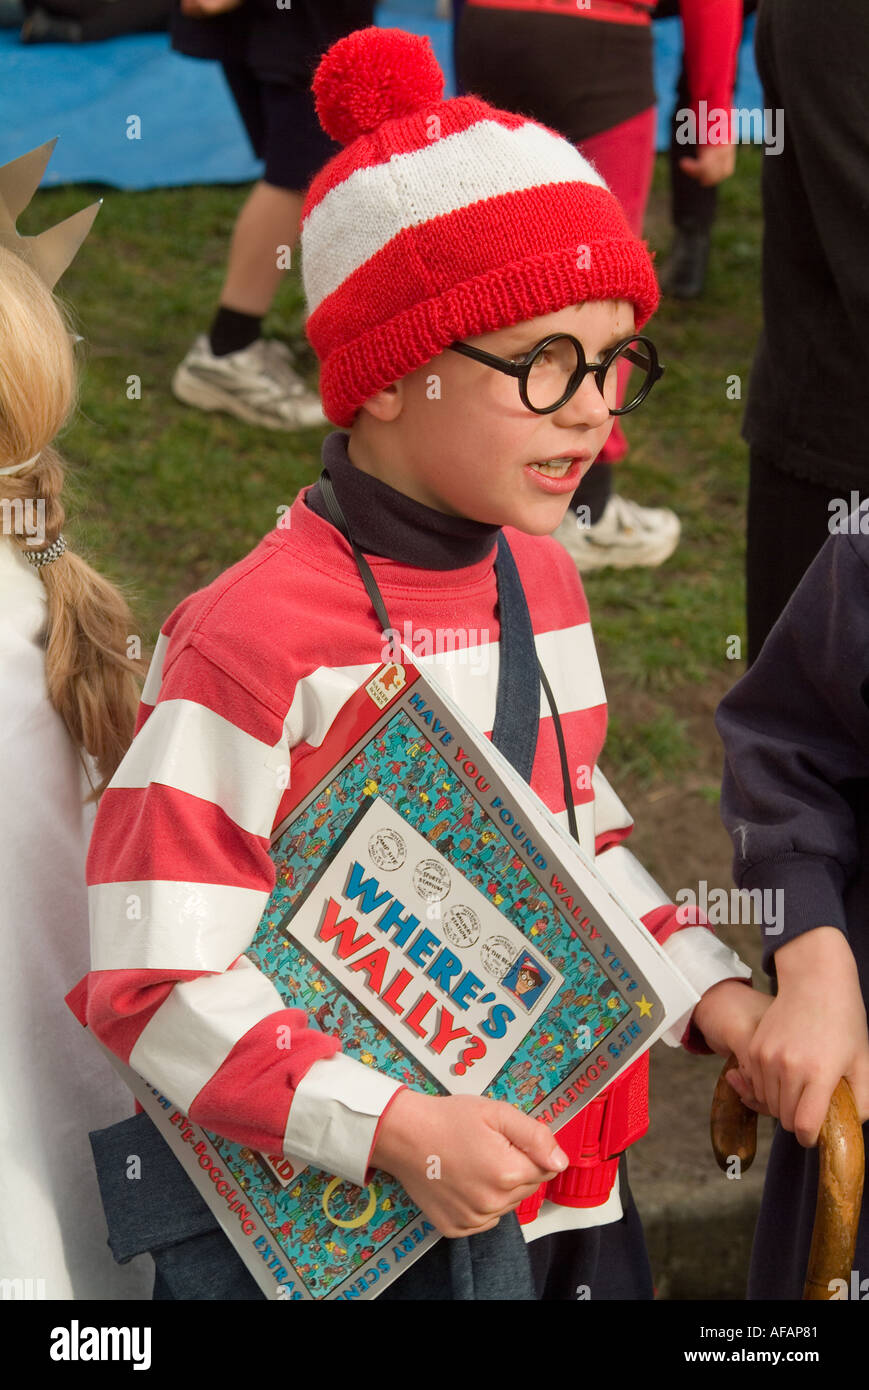 Primary school boy in dressed as Wally for a book parade where the children dress as their favourite characters from books Stock Photo